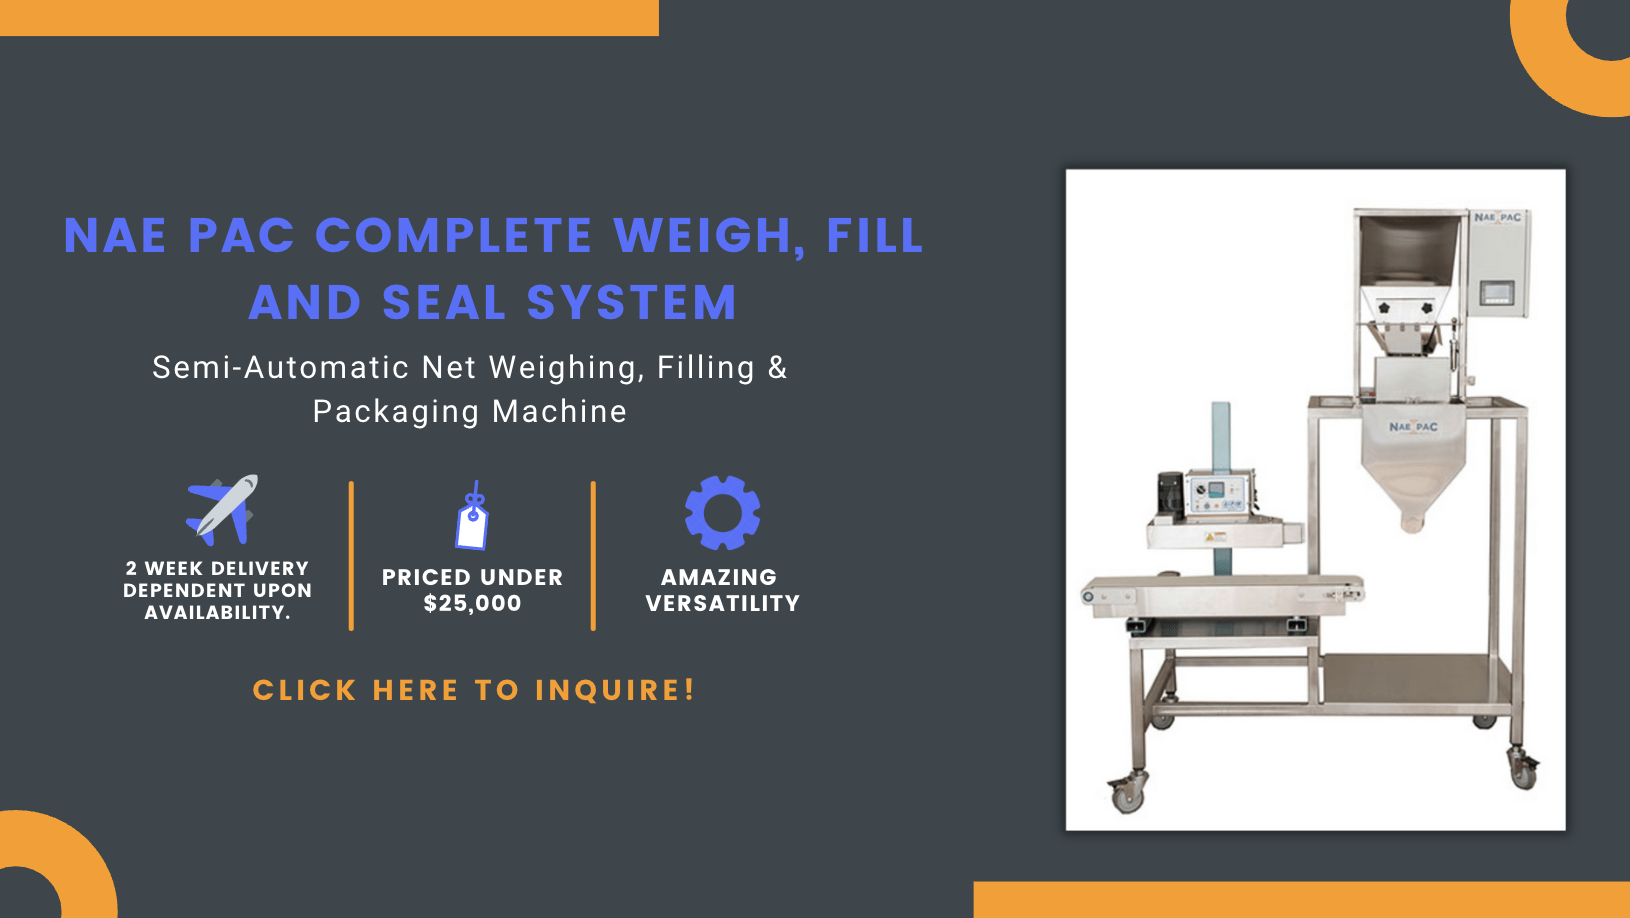 Nae Pac weigh, fill, and seal system